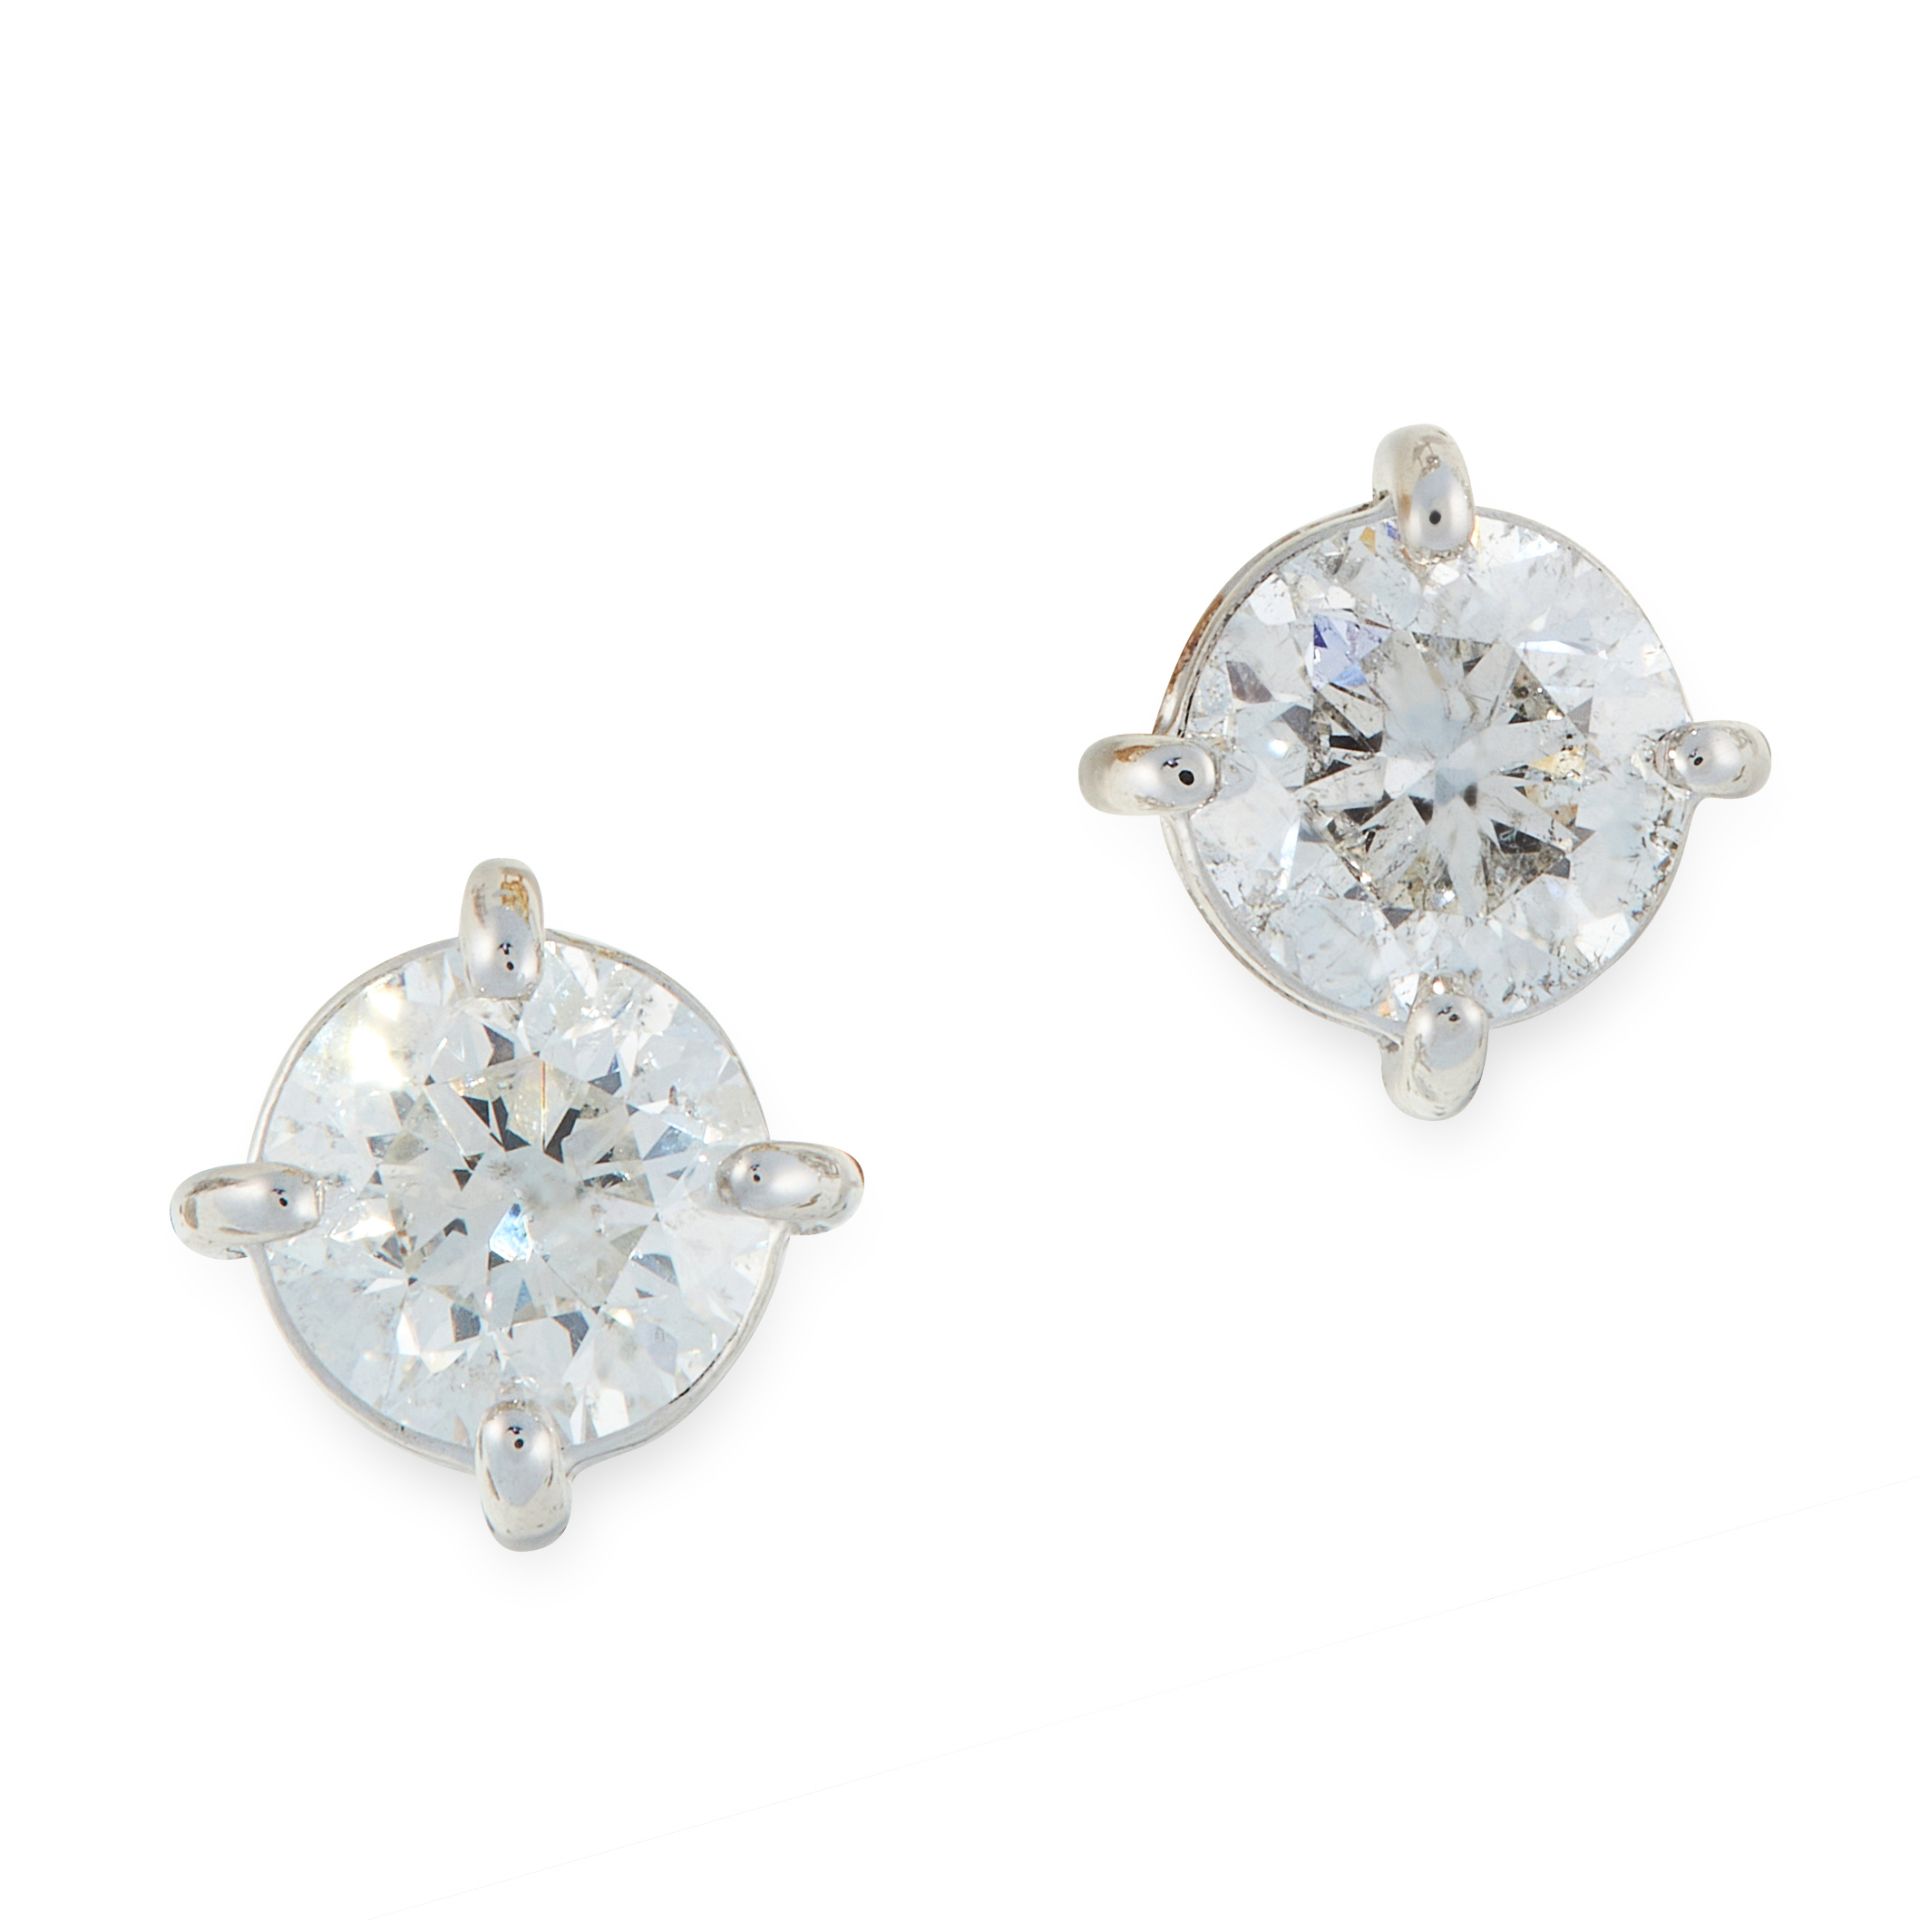 A PAIR OF DIAMOND STUD EARRINGS in 18ct white gold, set with a round cut diamond totalling 1.41